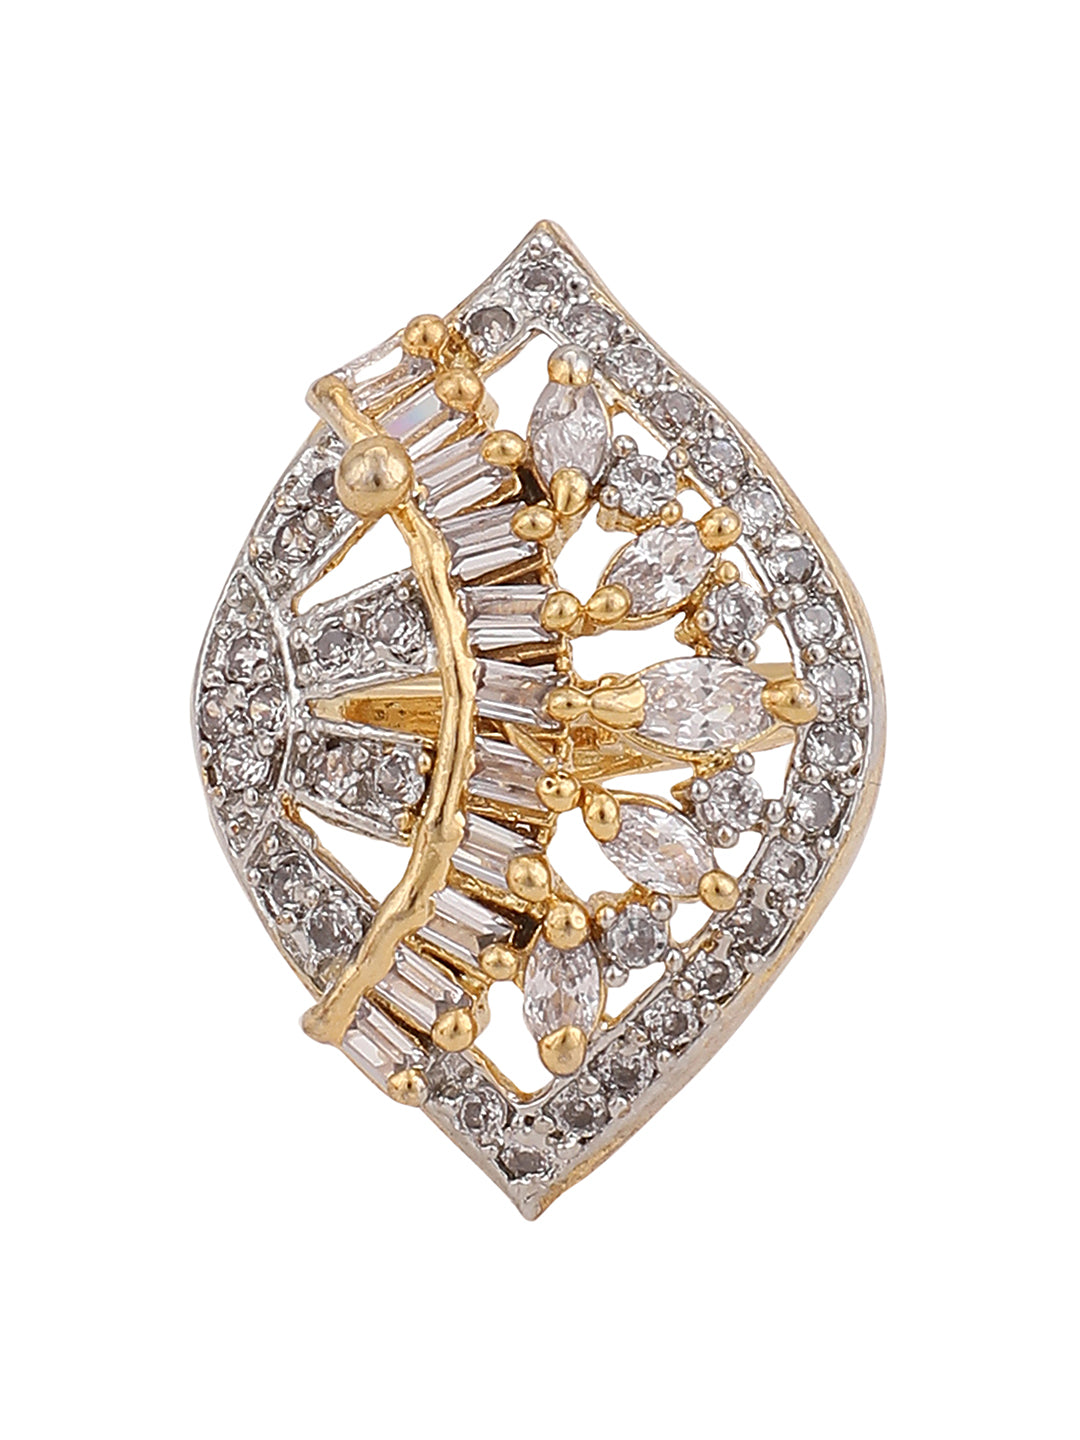 Women's Gold Plated White American Diamond Studded Adjustable Cocktail Ring - Anikas Creation